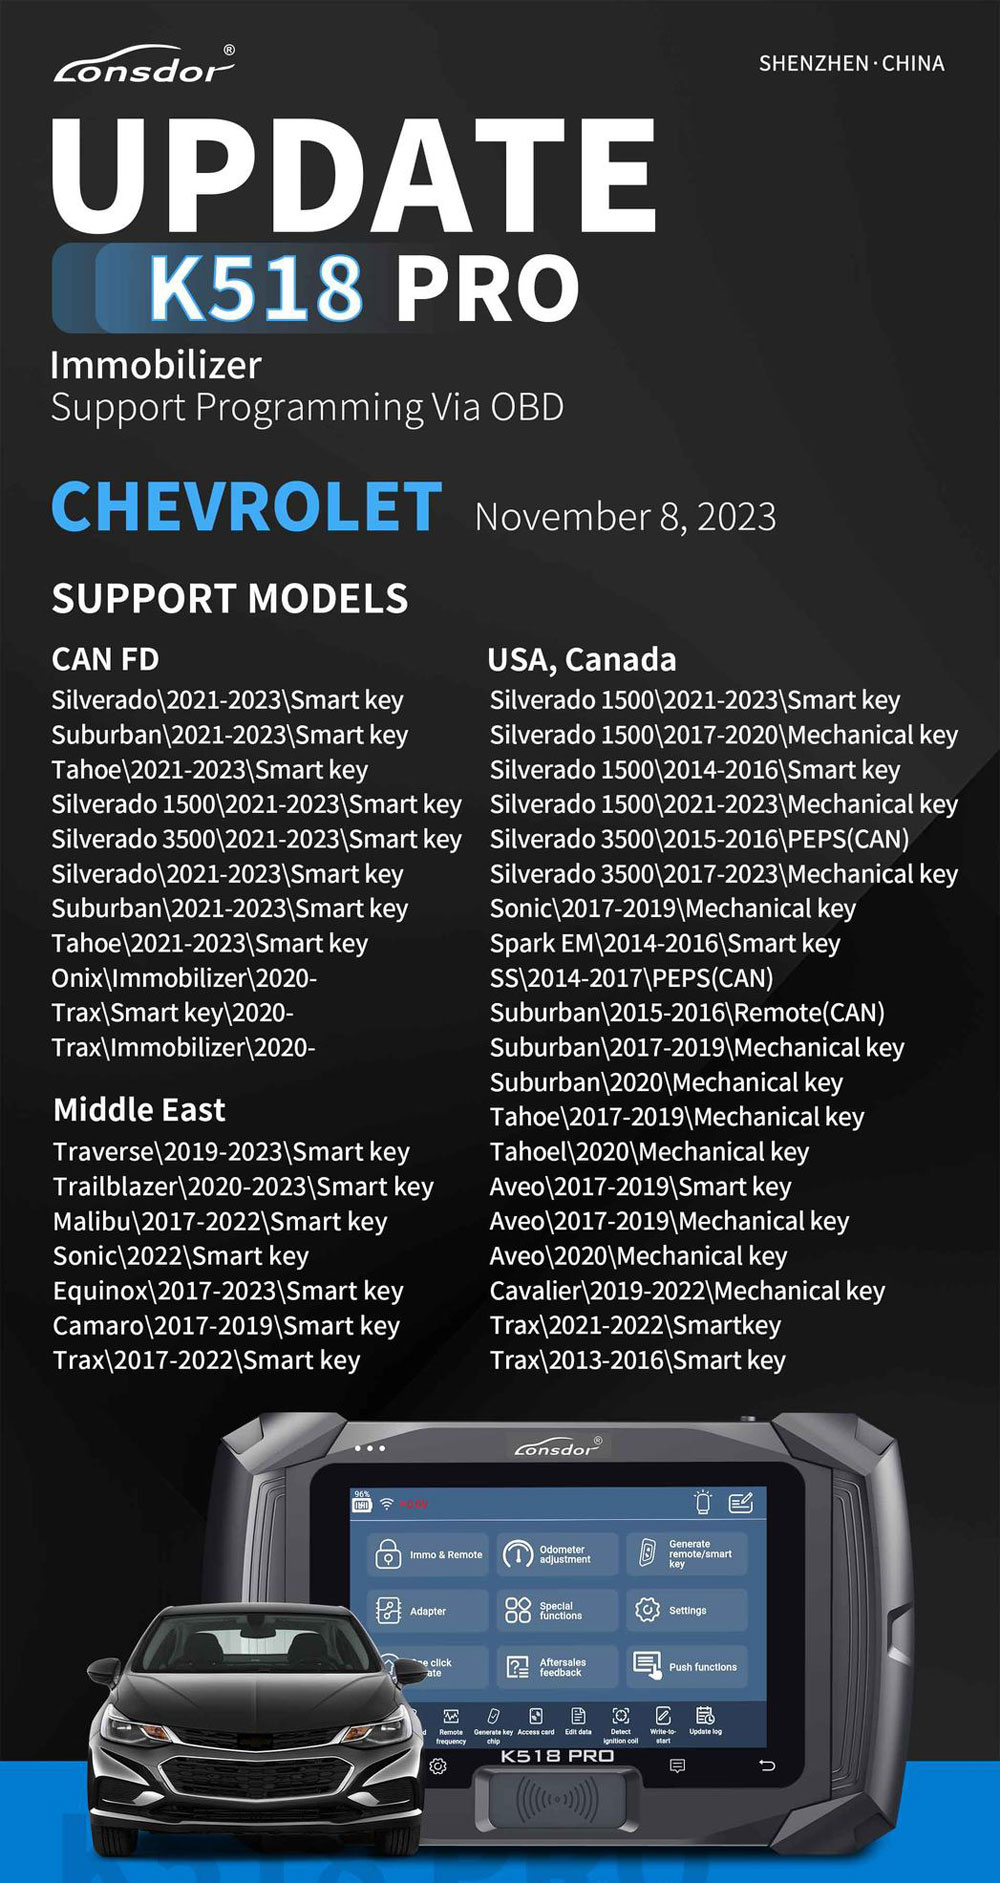 Grand Update about CHEVROLET for K518 Pro 